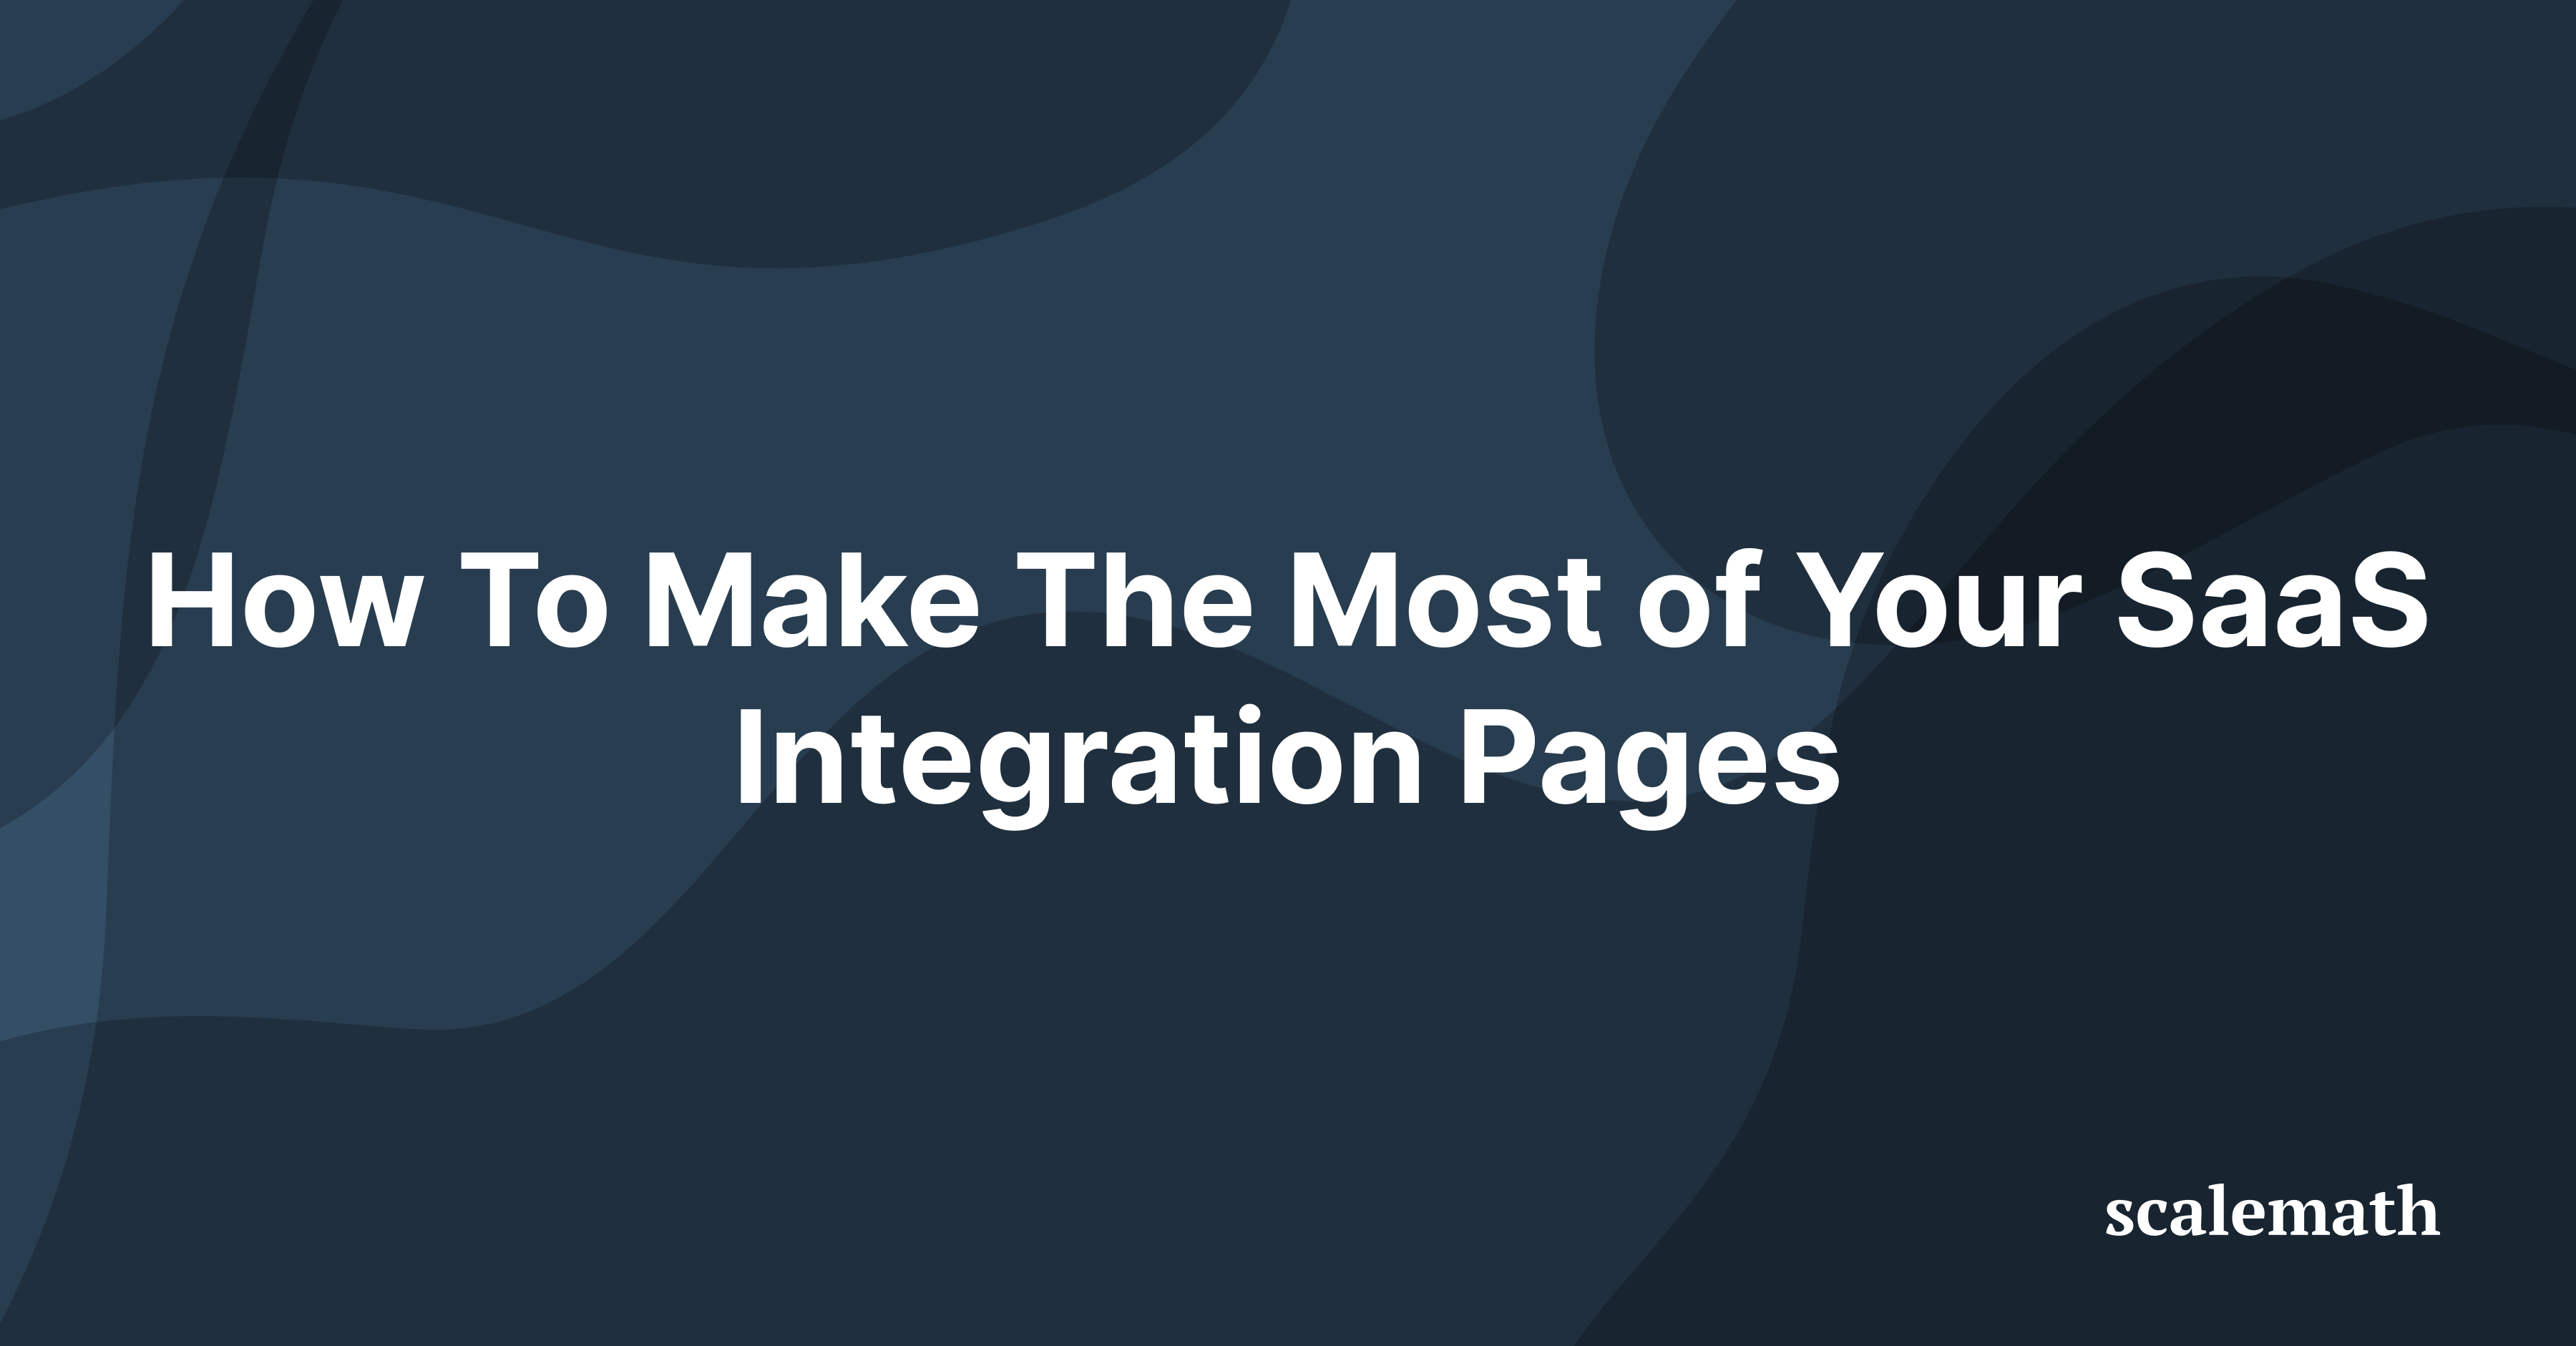 saas integration pages 1